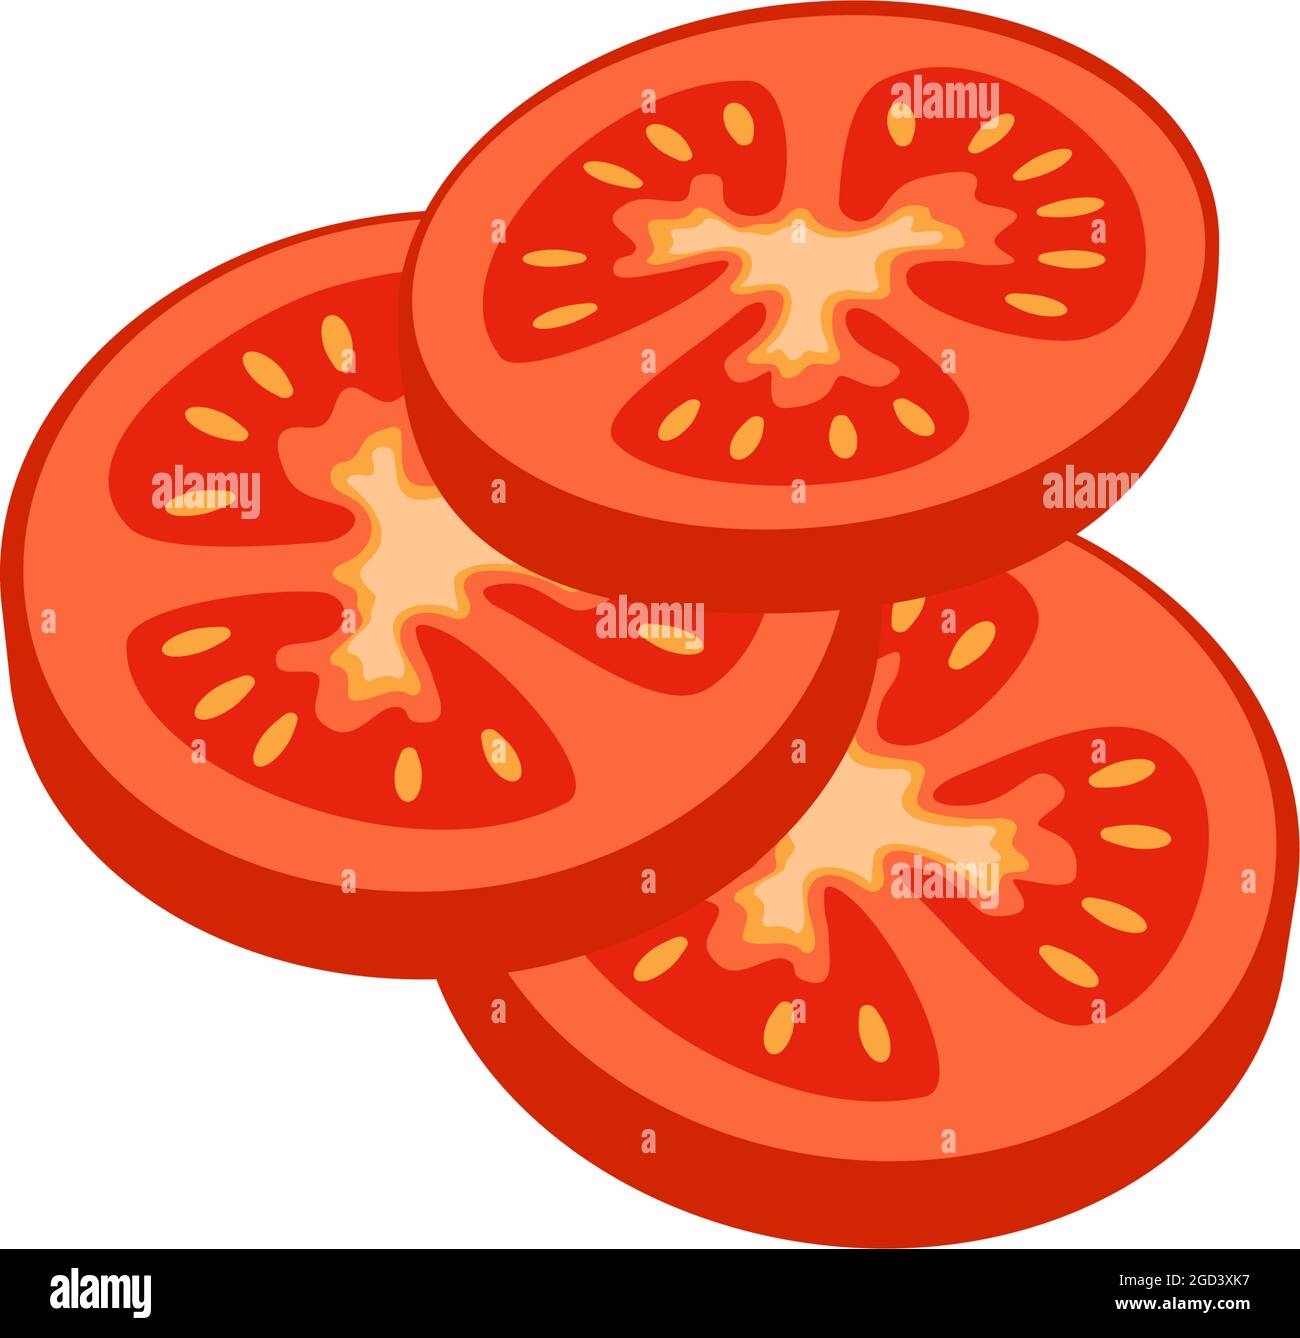 Tomato sliced into circles. Red vegetable slices, harvest for making tomato paste or salad. Food product for healthy eating Stock Vector